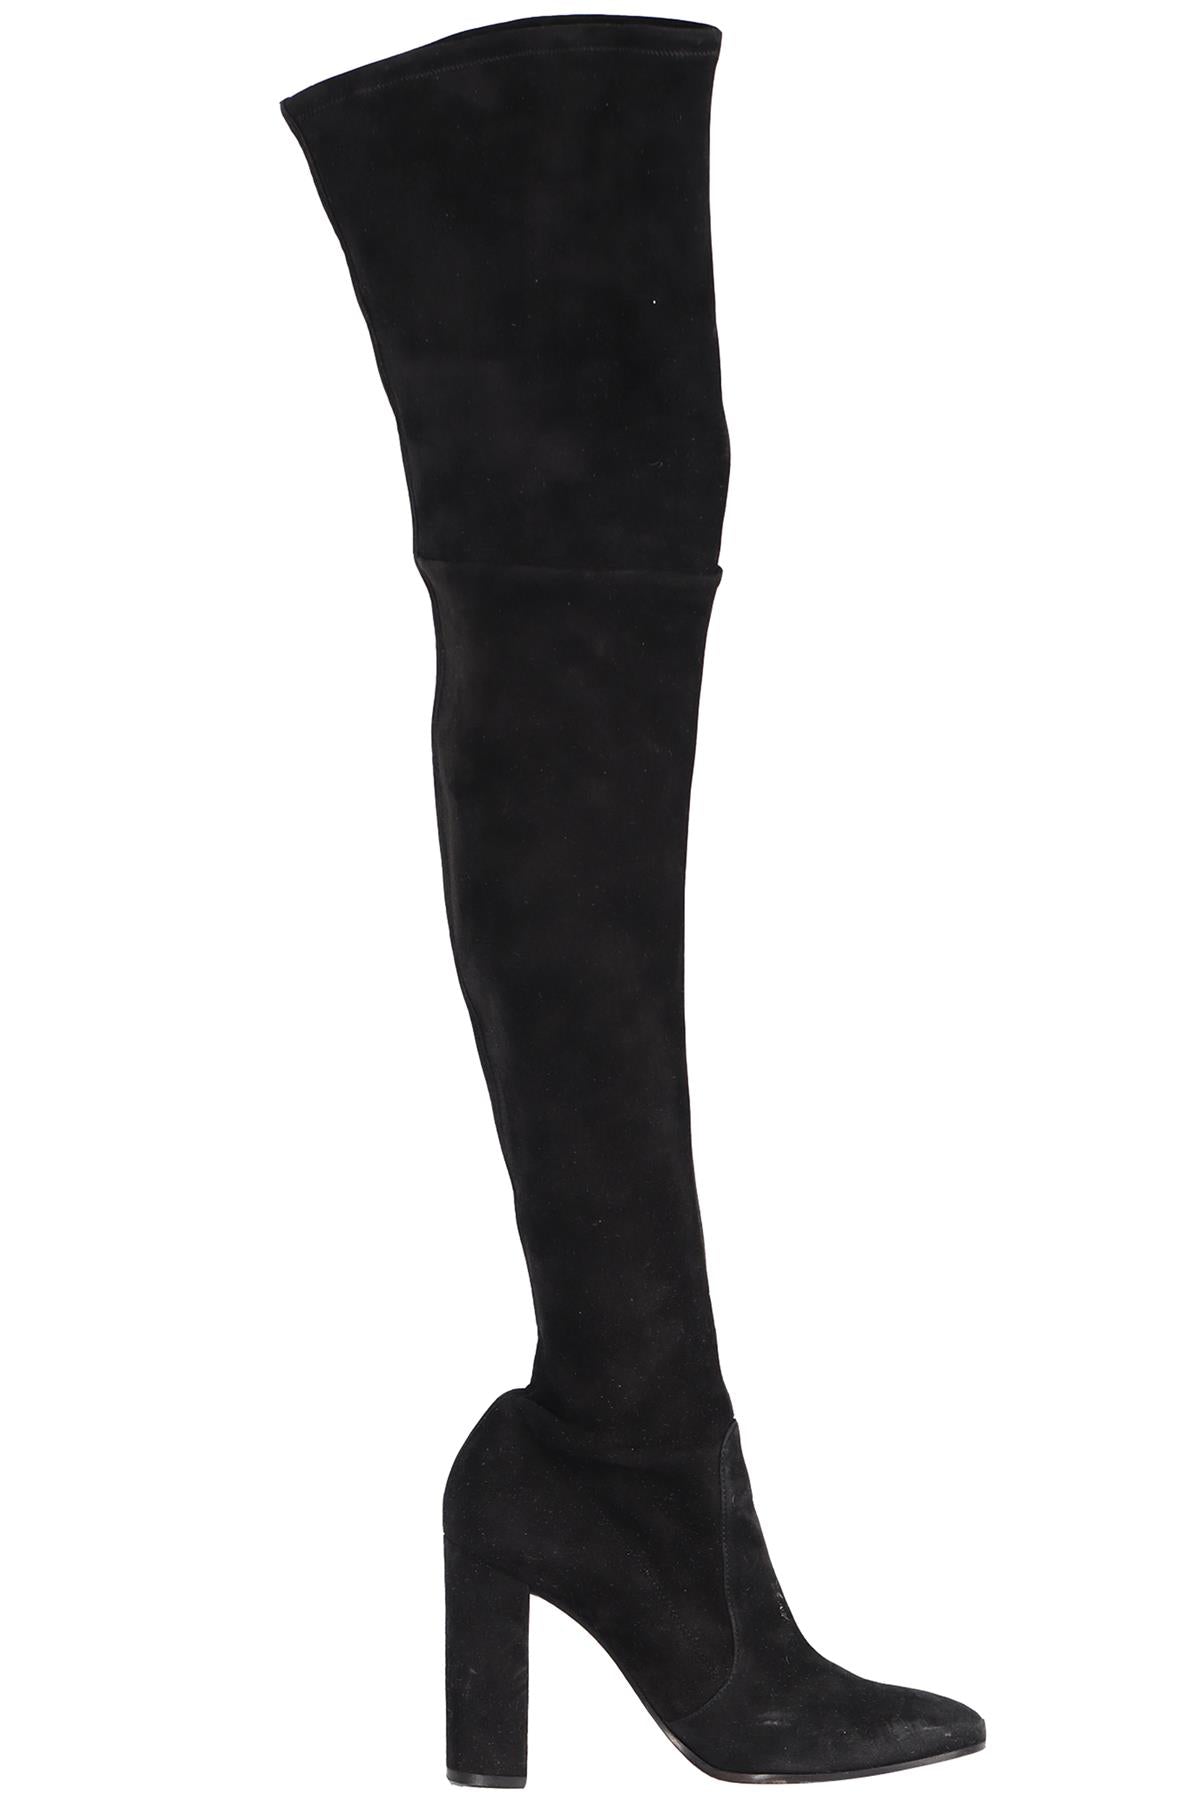 GIANVITO ROSSI SUEDE OVER THE KNEE BOOTS EU 38.5 UK 5.5 US 8.5